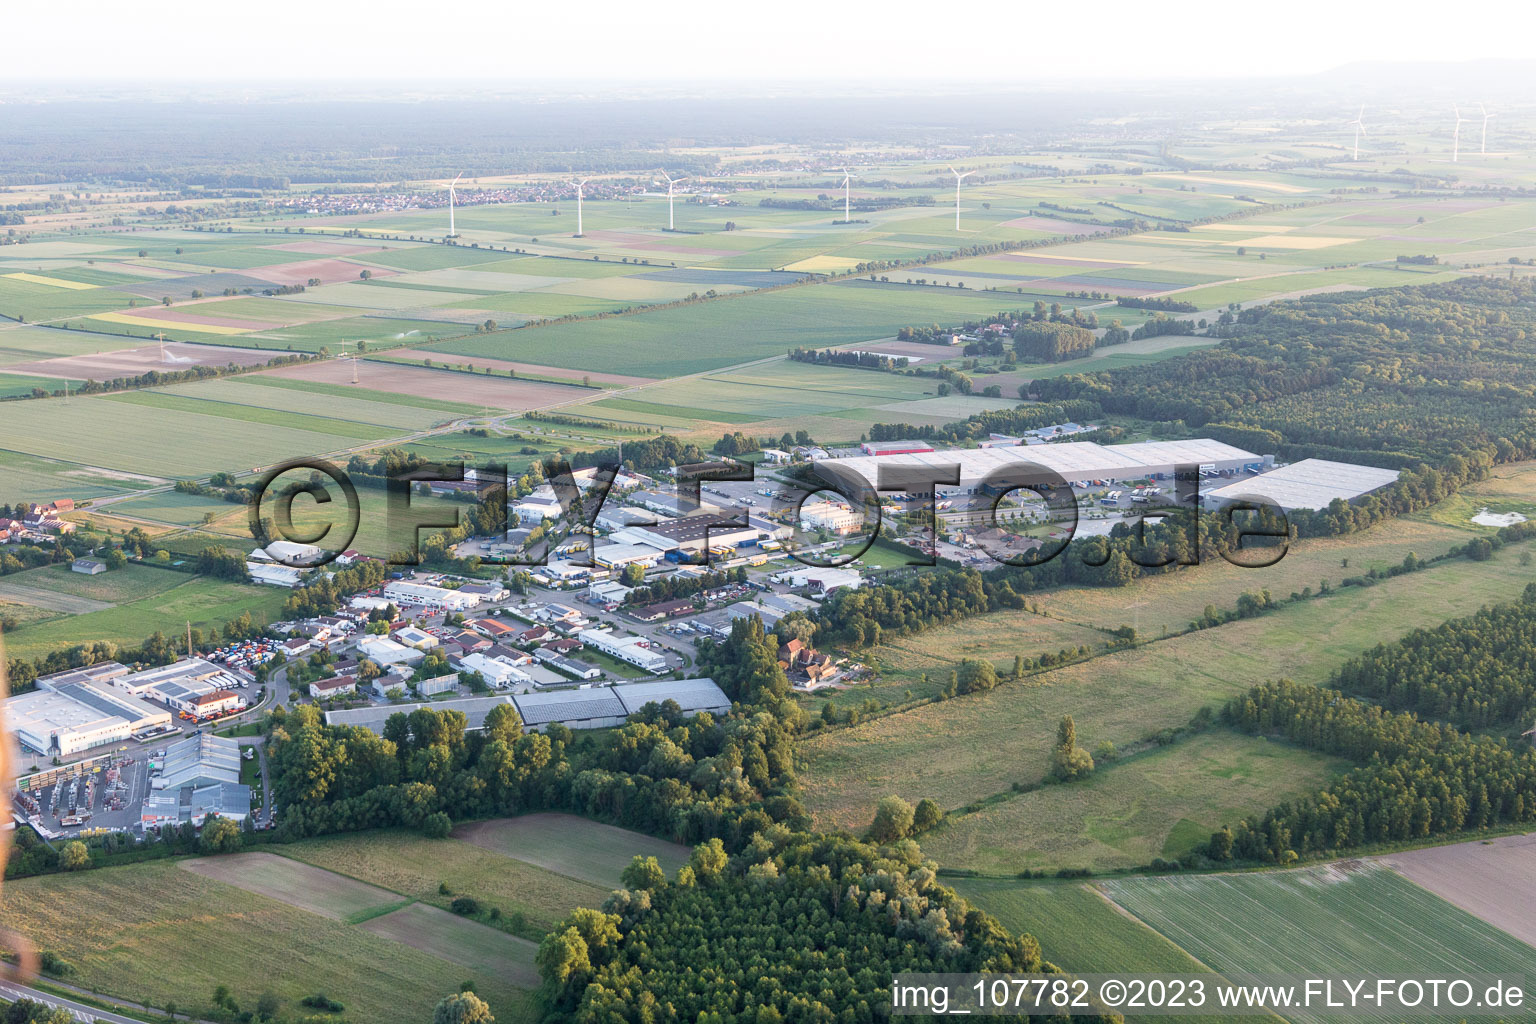 Bird's eye view of Horst industrial area in the district Minderslachen in Kandel in the state Rhineland-Palatinate, Germany